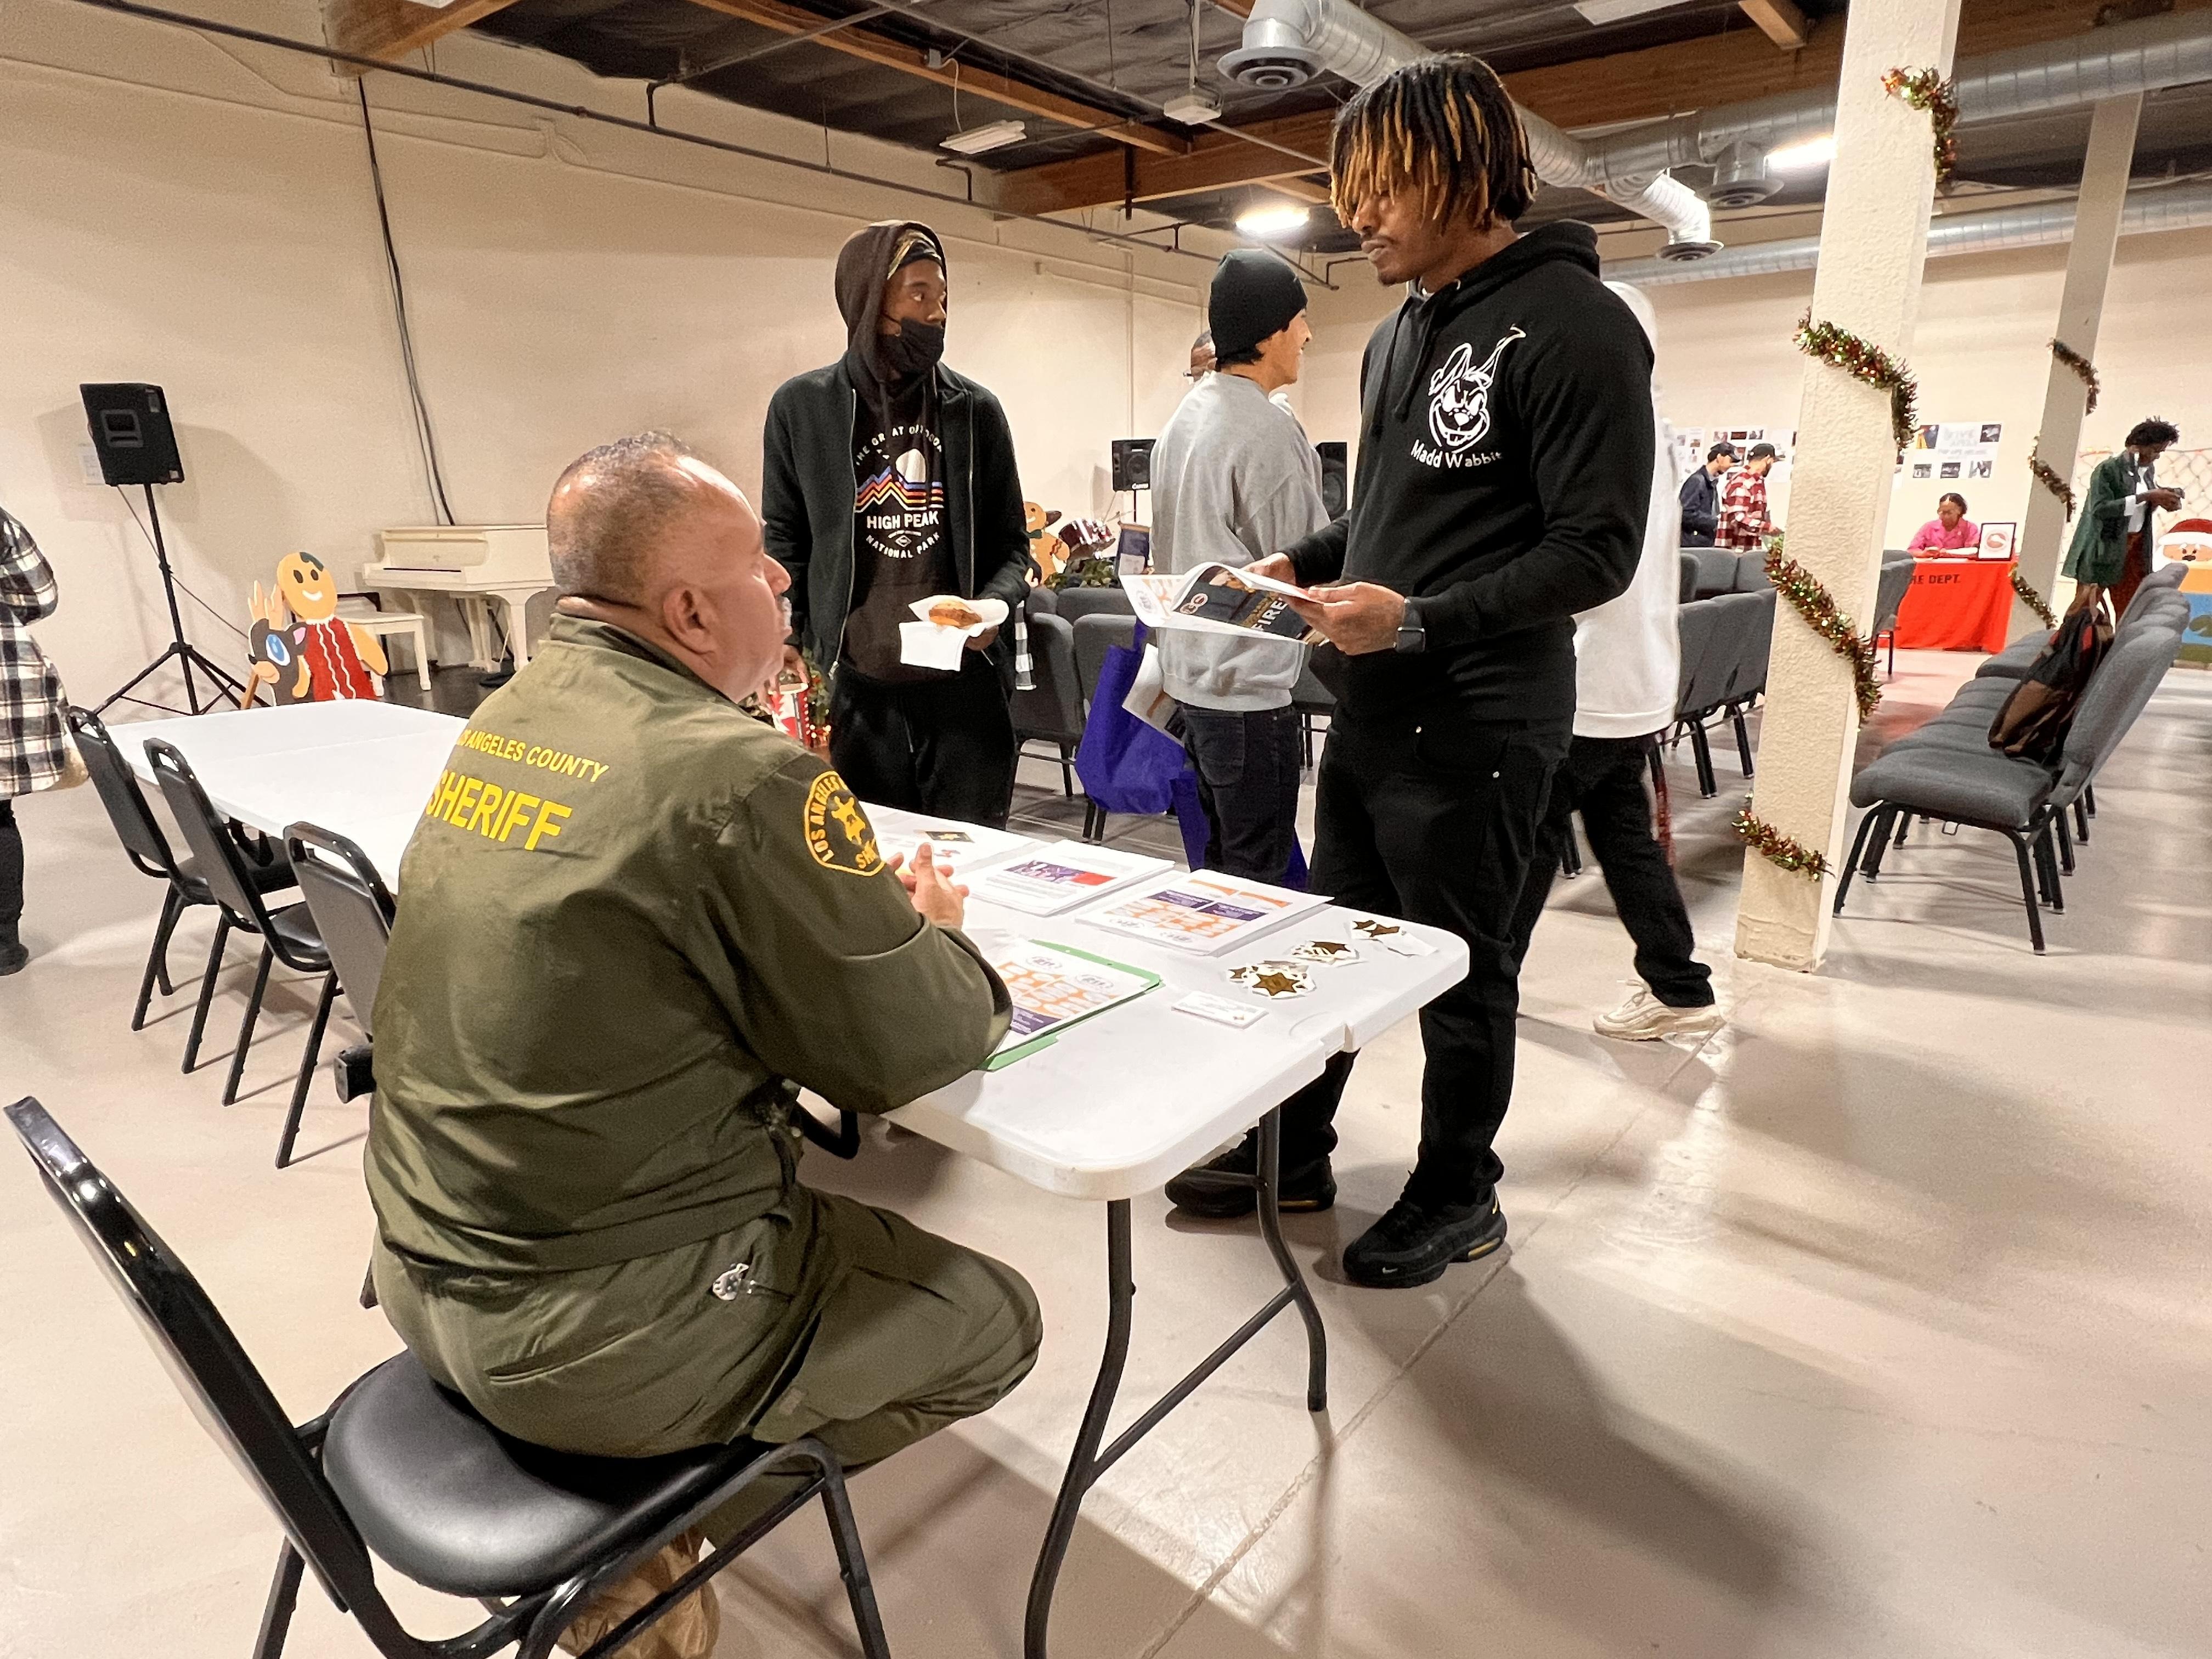 A student speaks to a sheriff at a table during the CAP